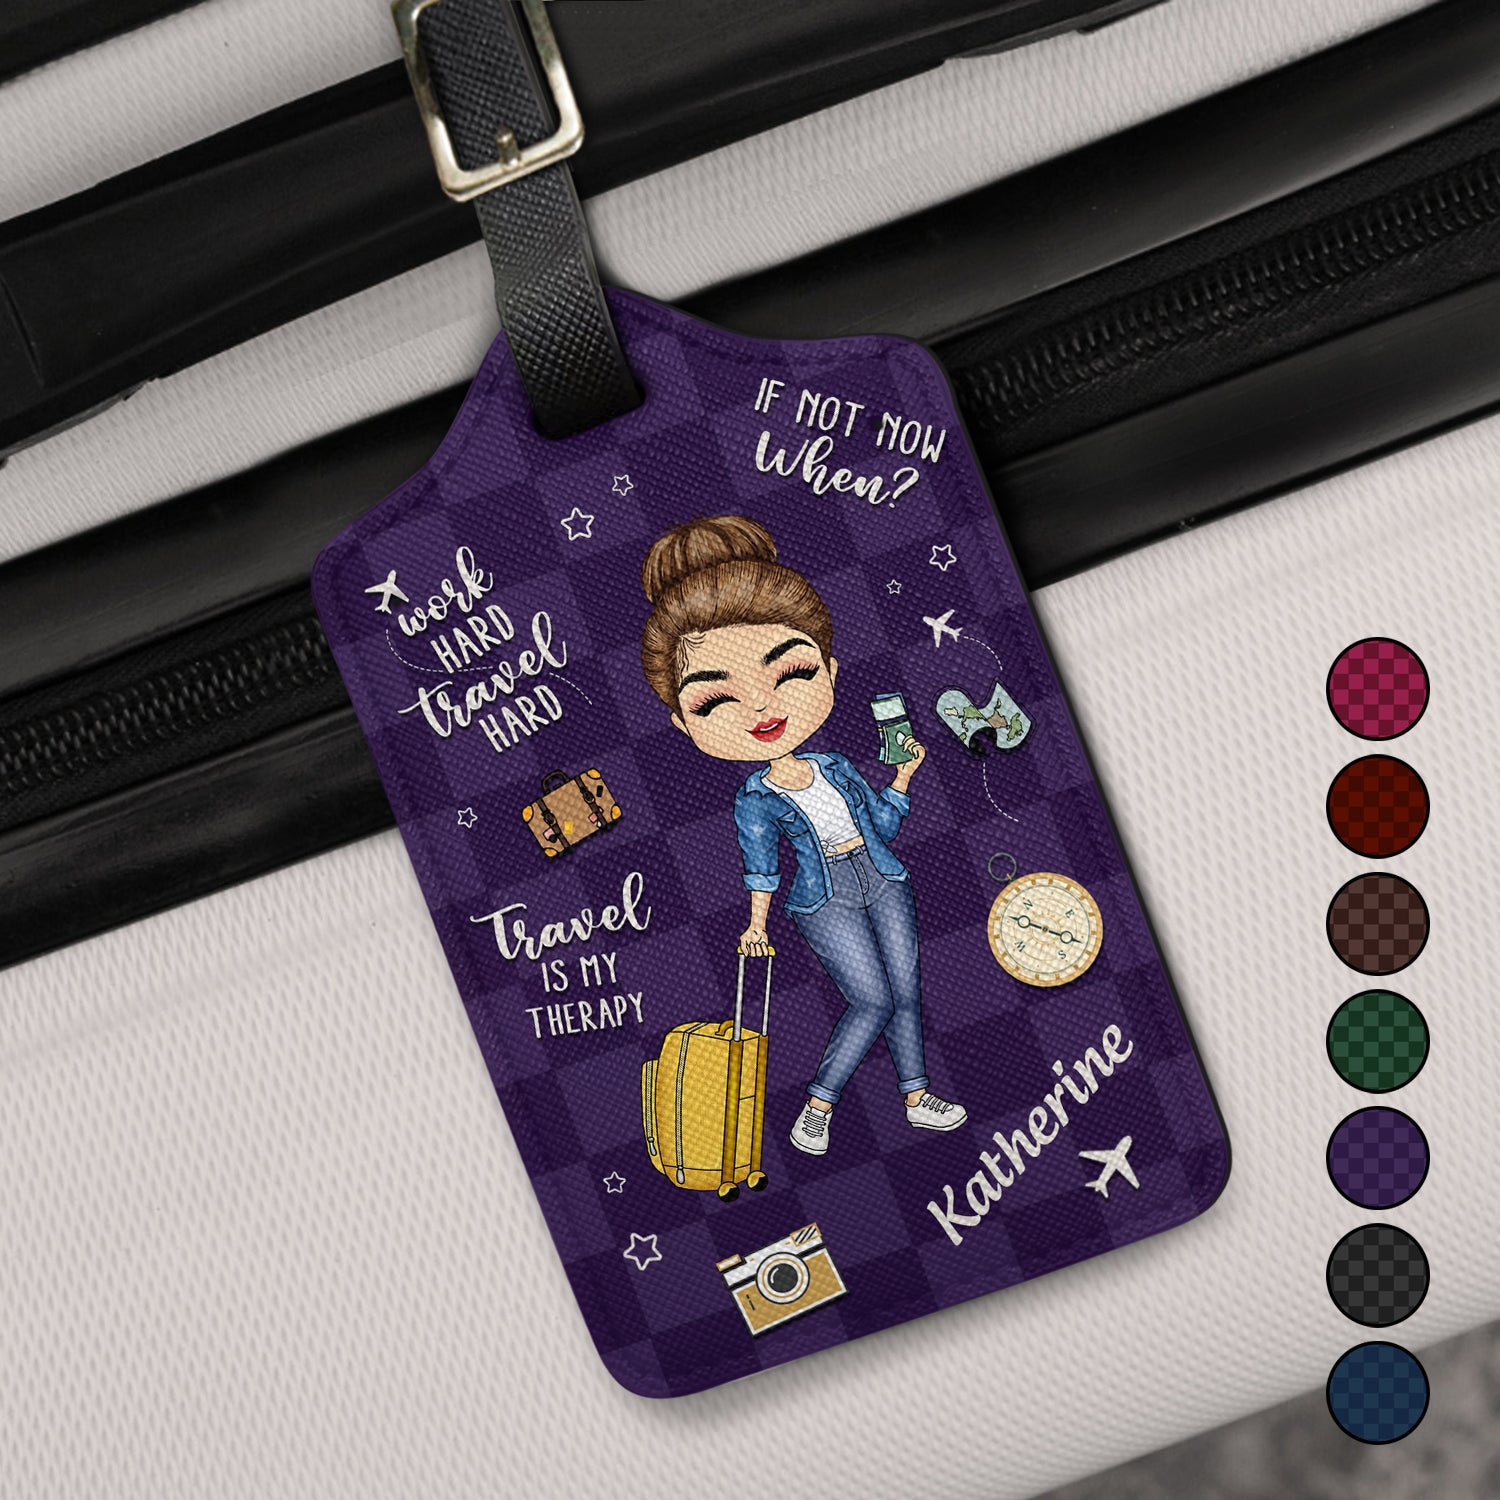 Travel Is My Therapy - Gift For Travellers, Travelling Lovers, Him, Her - Personalized Luggage Tag